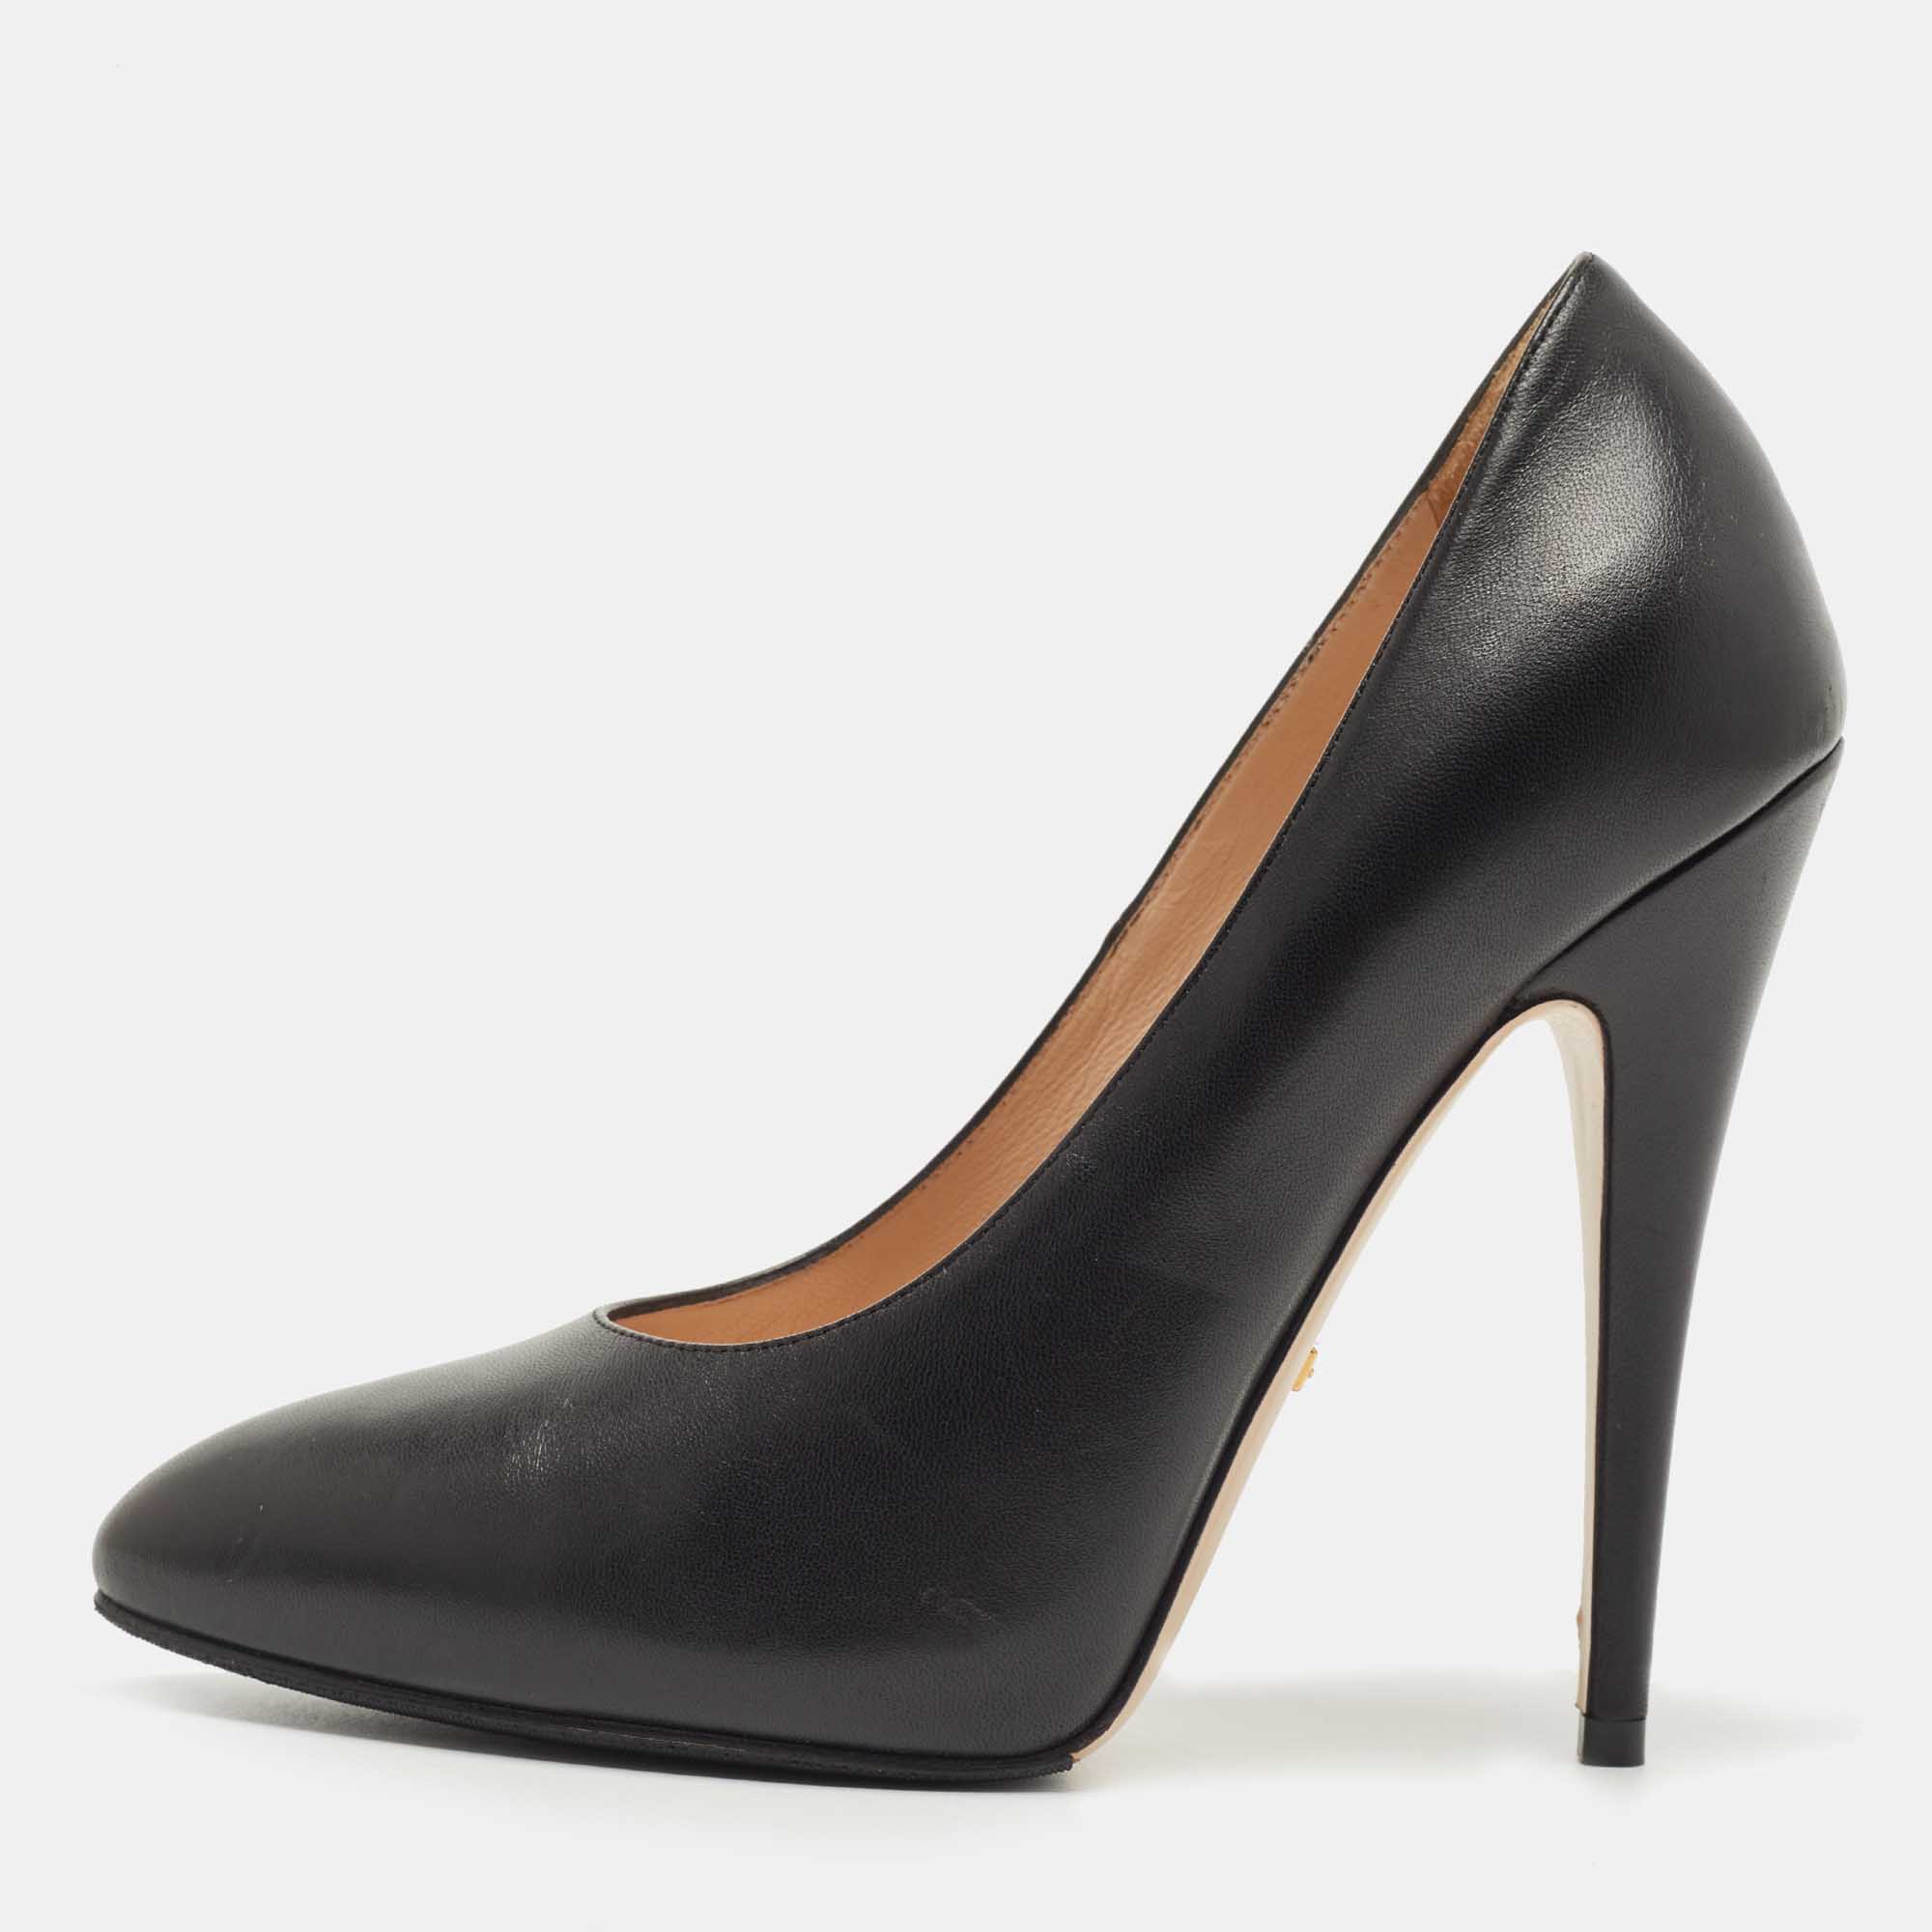 Gucci black leather pointed toe pumps size 36.5